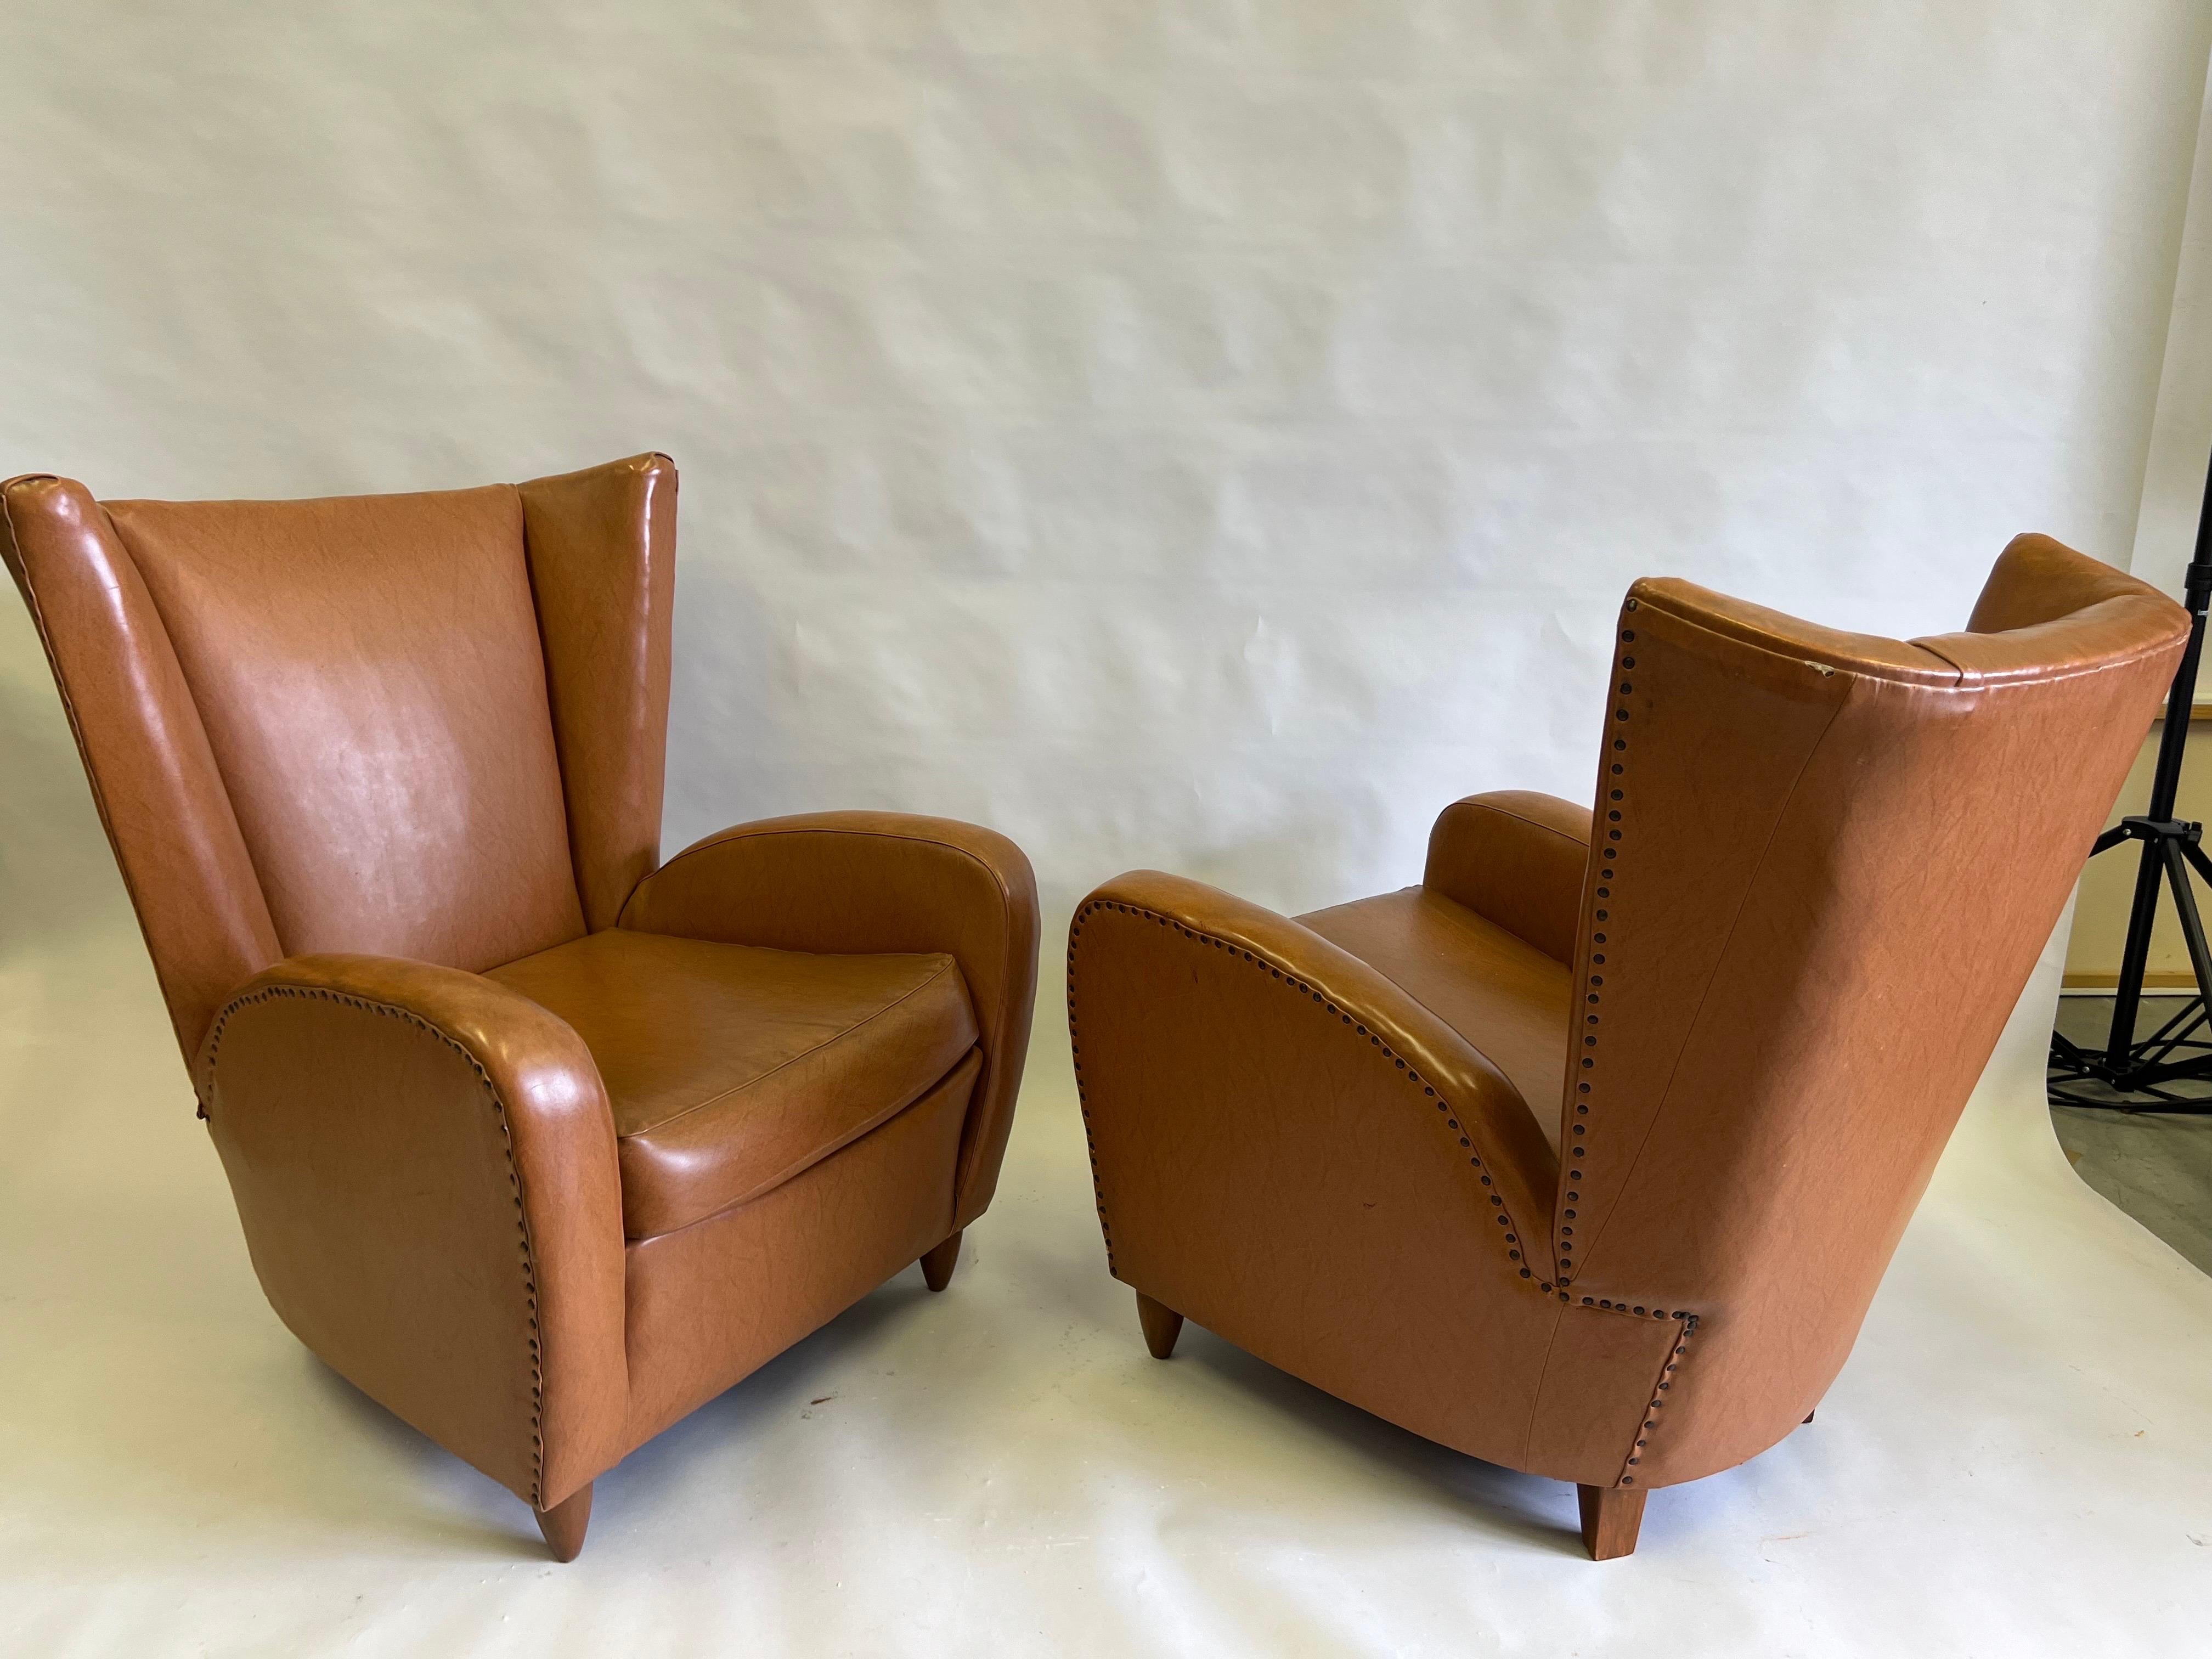 An Elegant and Timeless Pair of Italian Mid-Century Modern Neoclassical Wingback Lounge or Club  Chairs in Faux Leather by Paolo Buffa, Italy, circa 1947. These armchairs chairs are special objects of design with their dynamic form and smooth,